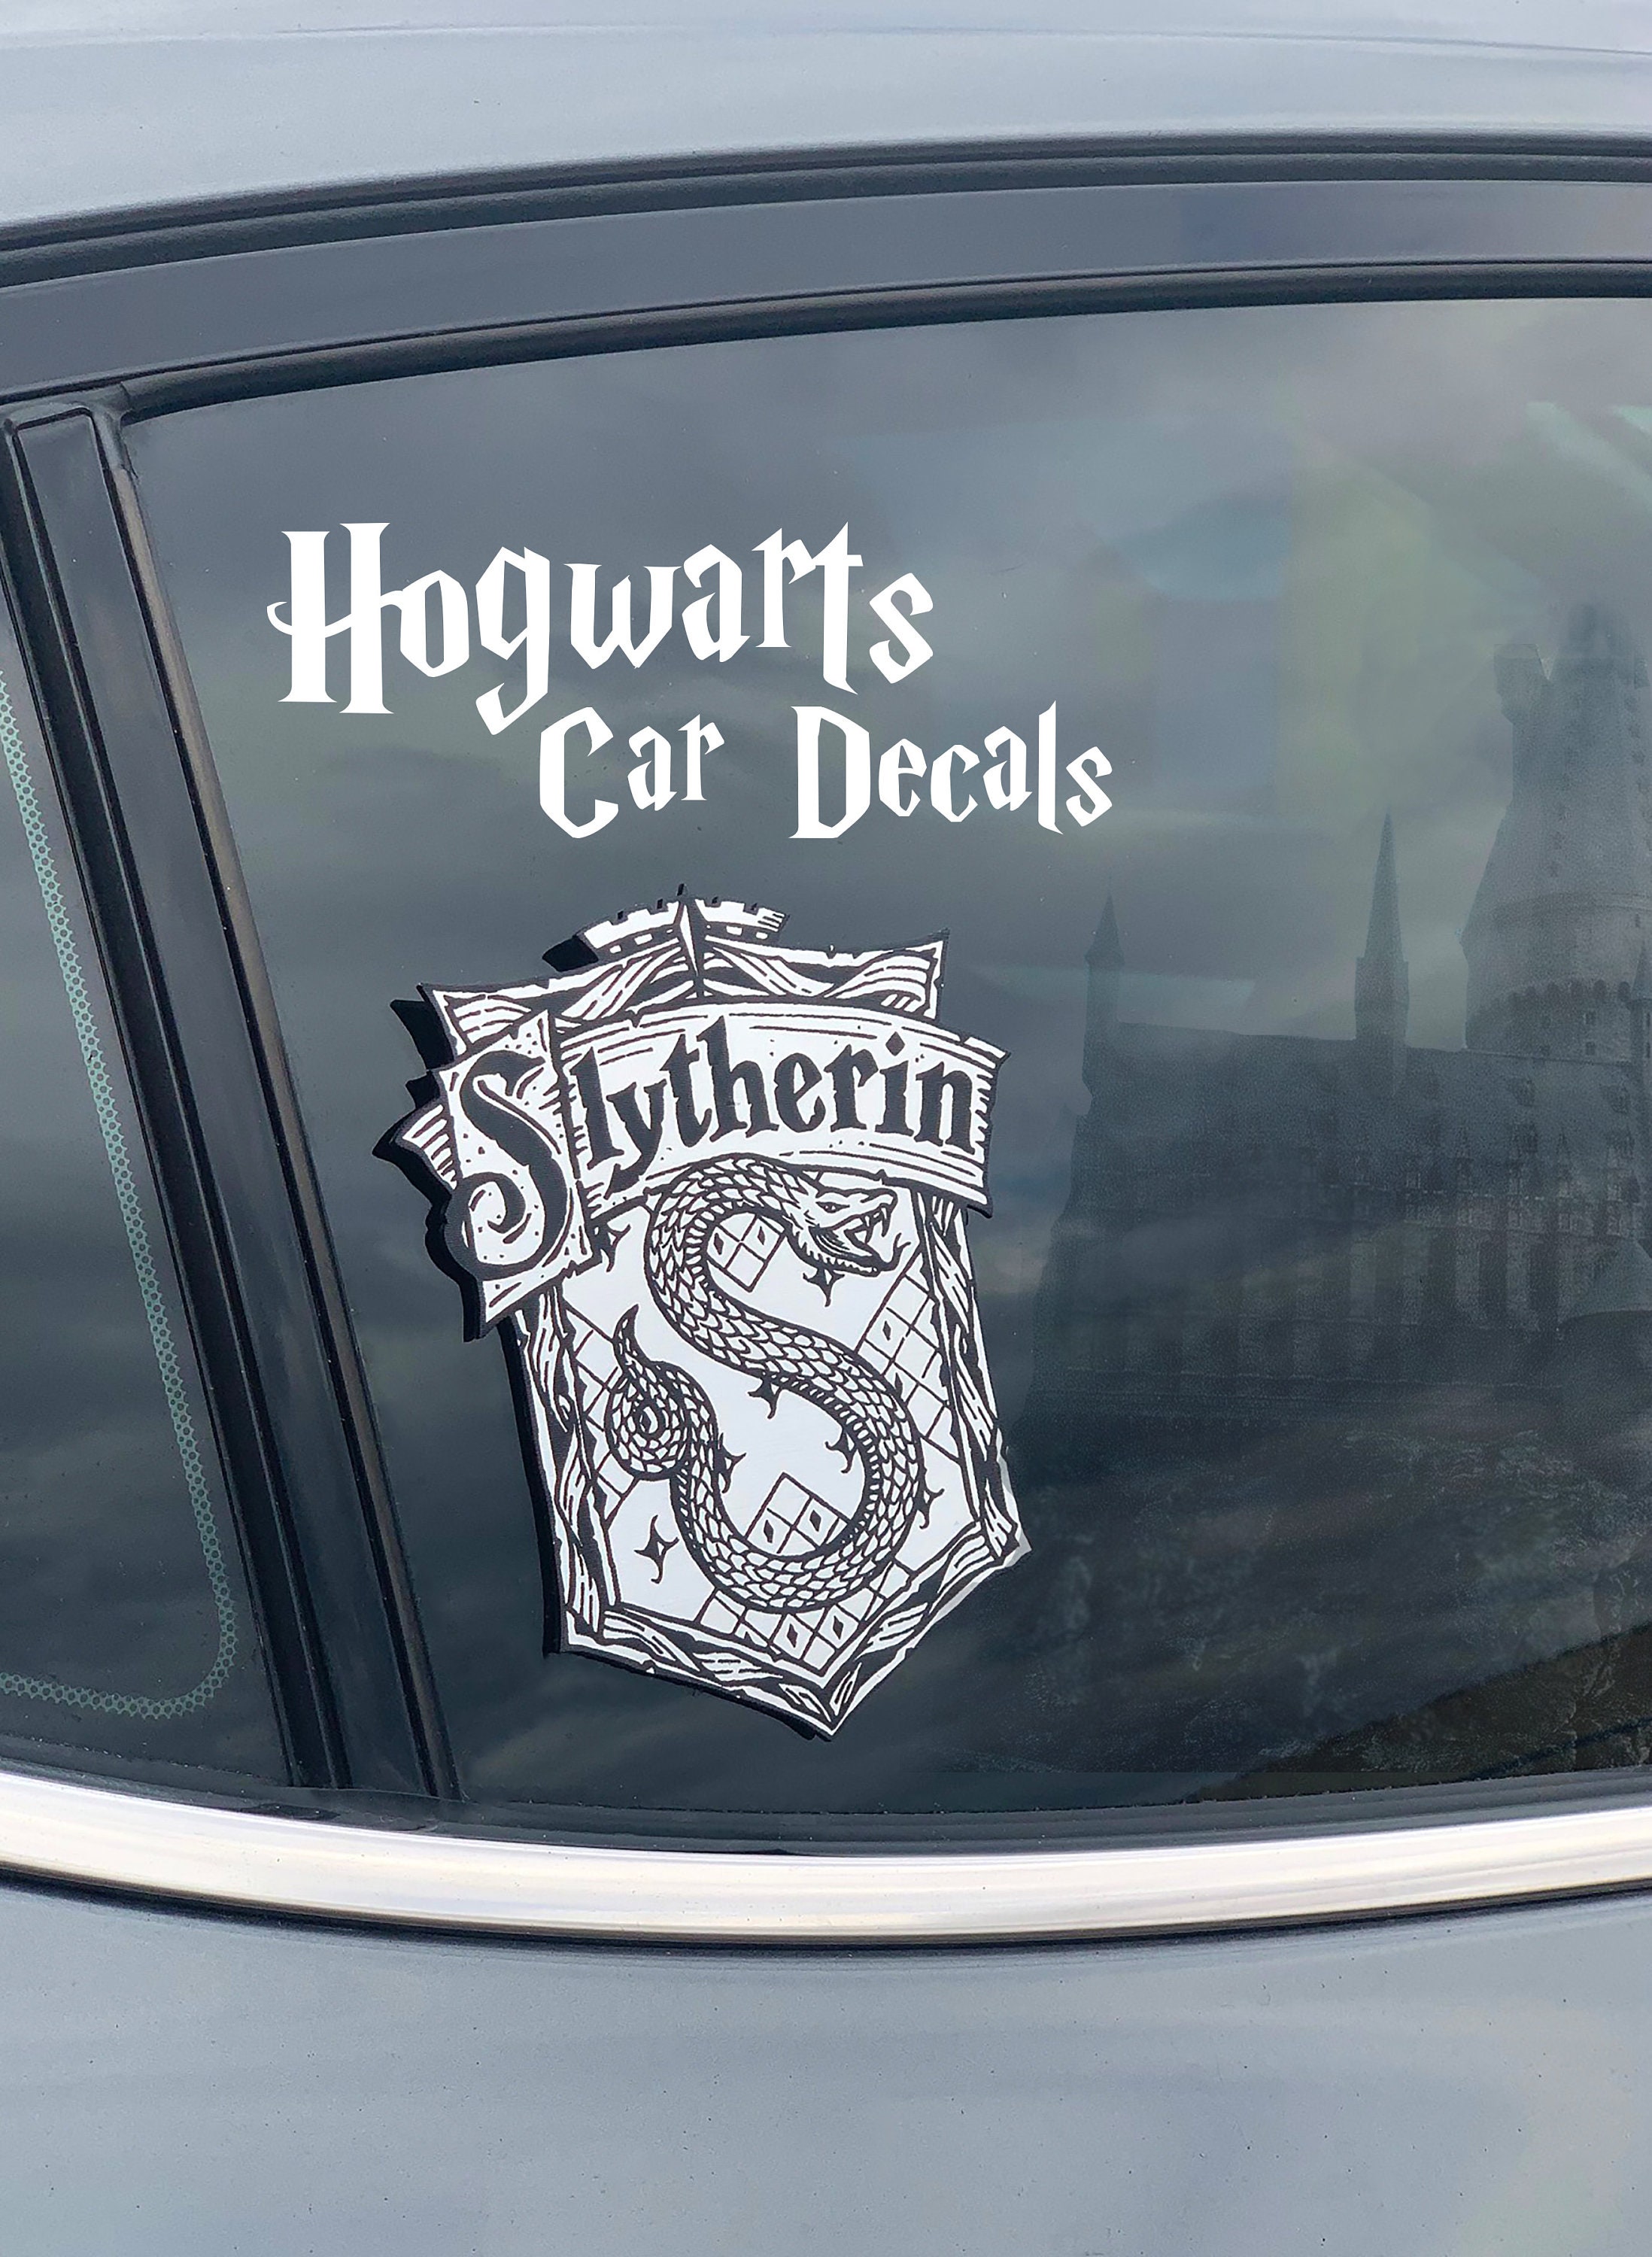 Slytherin Harry Potter T Shirt Iron on Transfer Decal